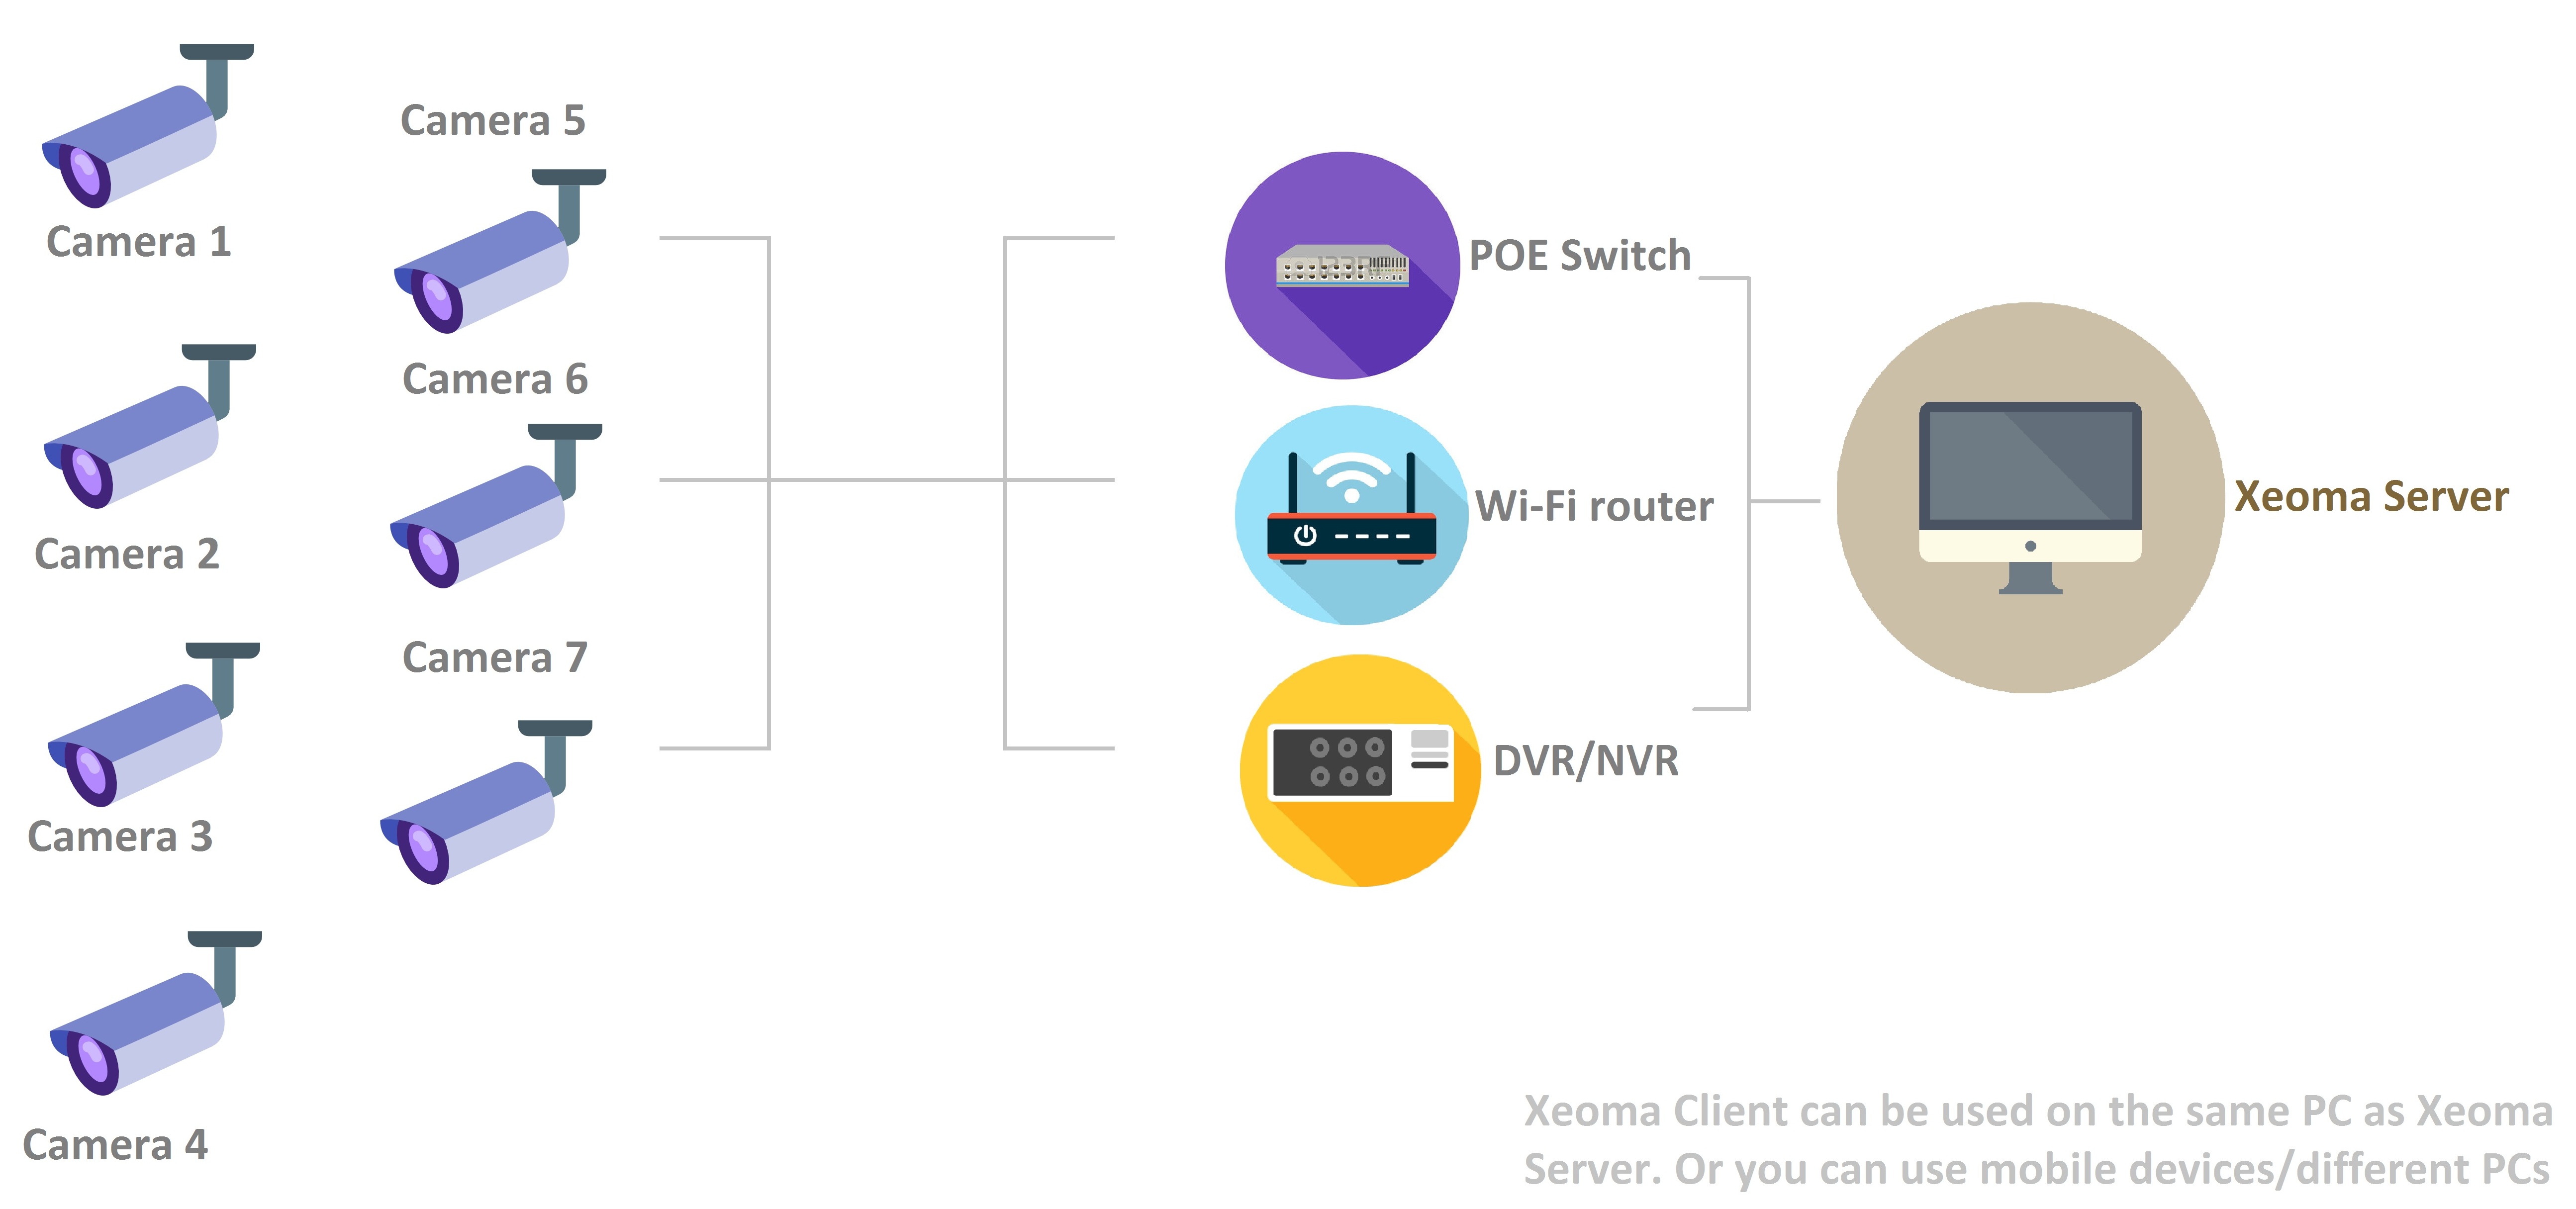 Xeoma surveillance can be used in enterprise environment with a system architecture like depicted